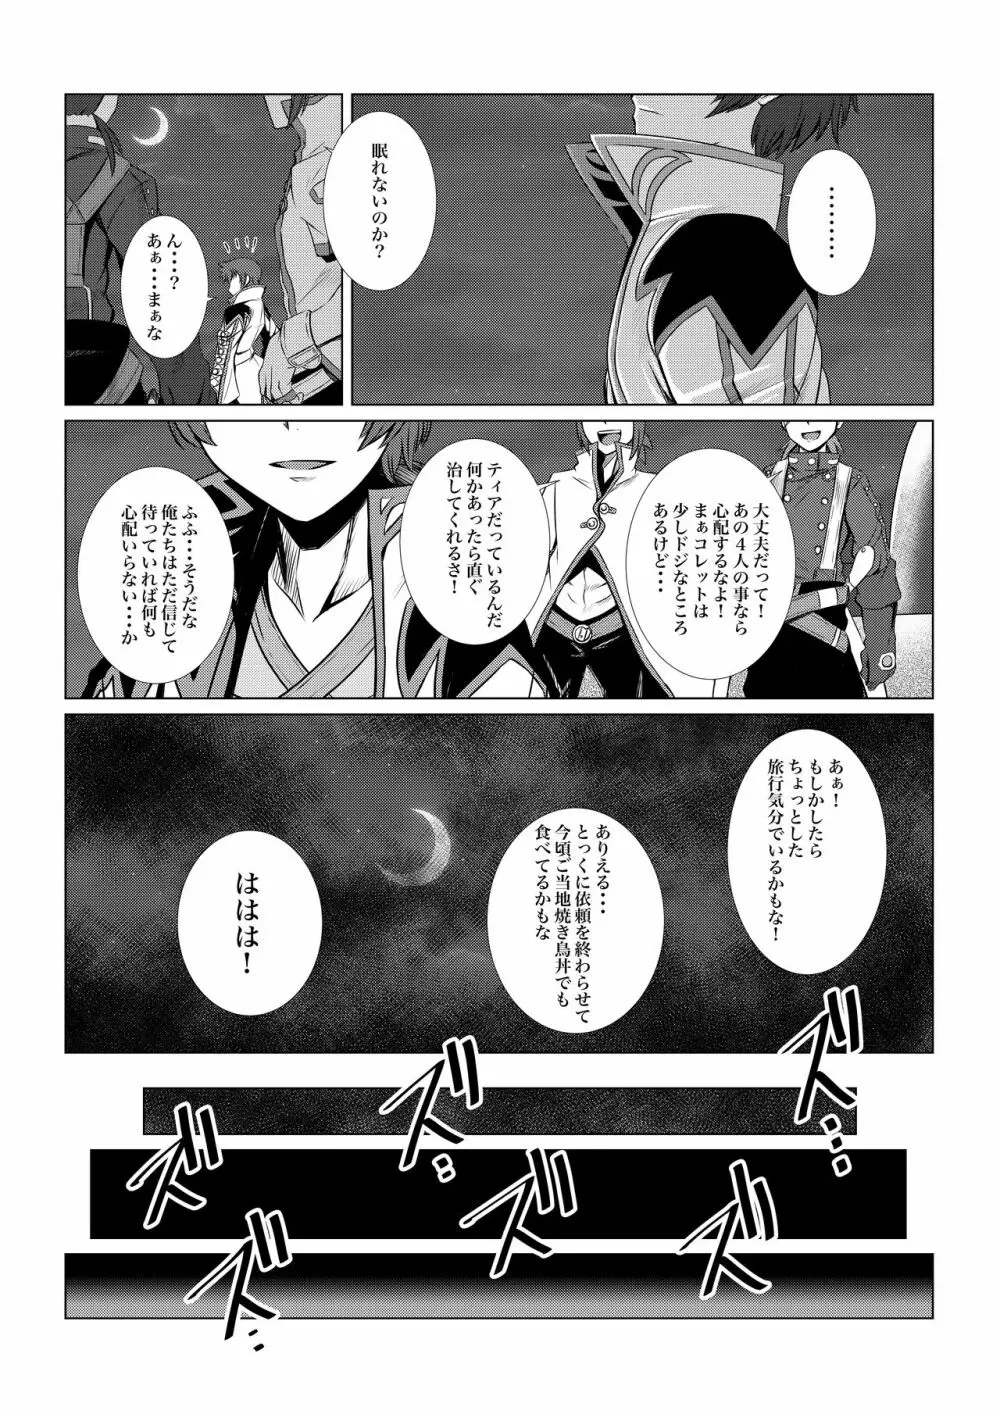 Tales Of DarkSide〜三散華〜 - page2